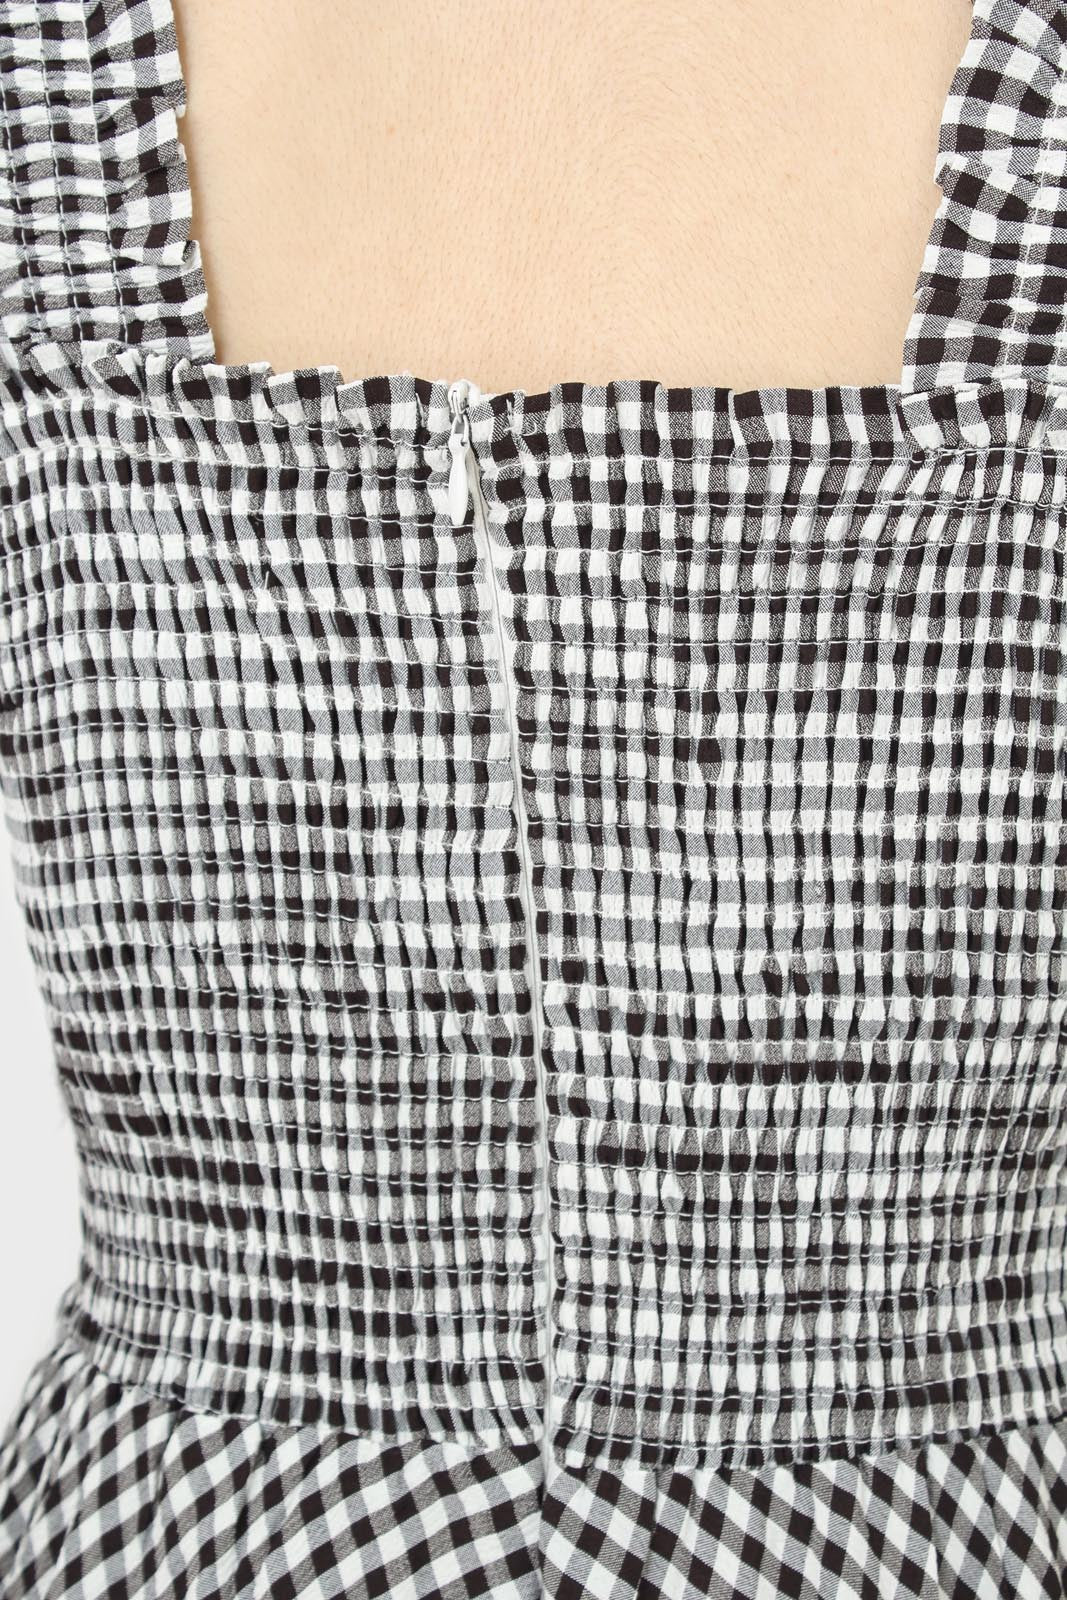 Black and white gingham ruched bodice dress